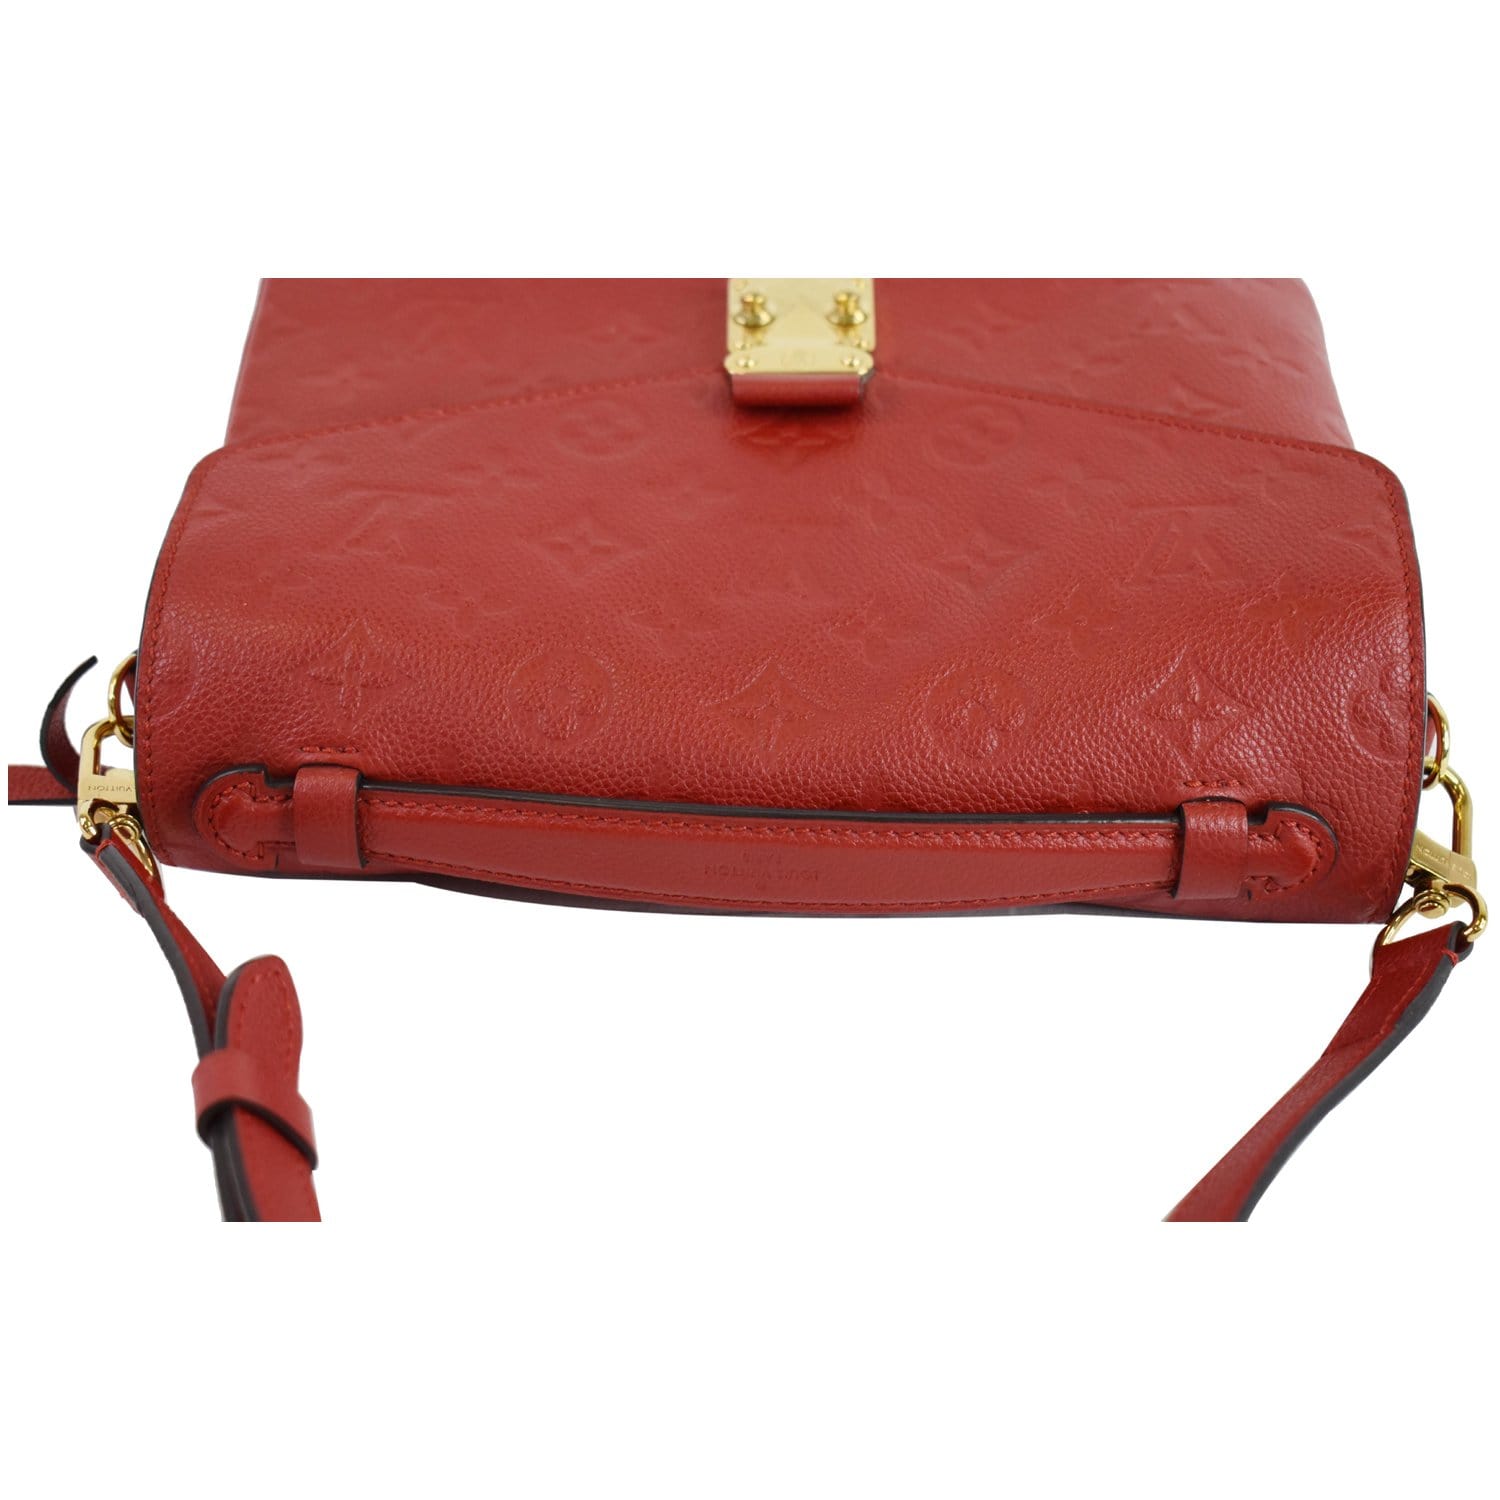 Louis Vuitton - Authenticated Metis Handbag - Leather Red Plain for Women, Very Good Condition